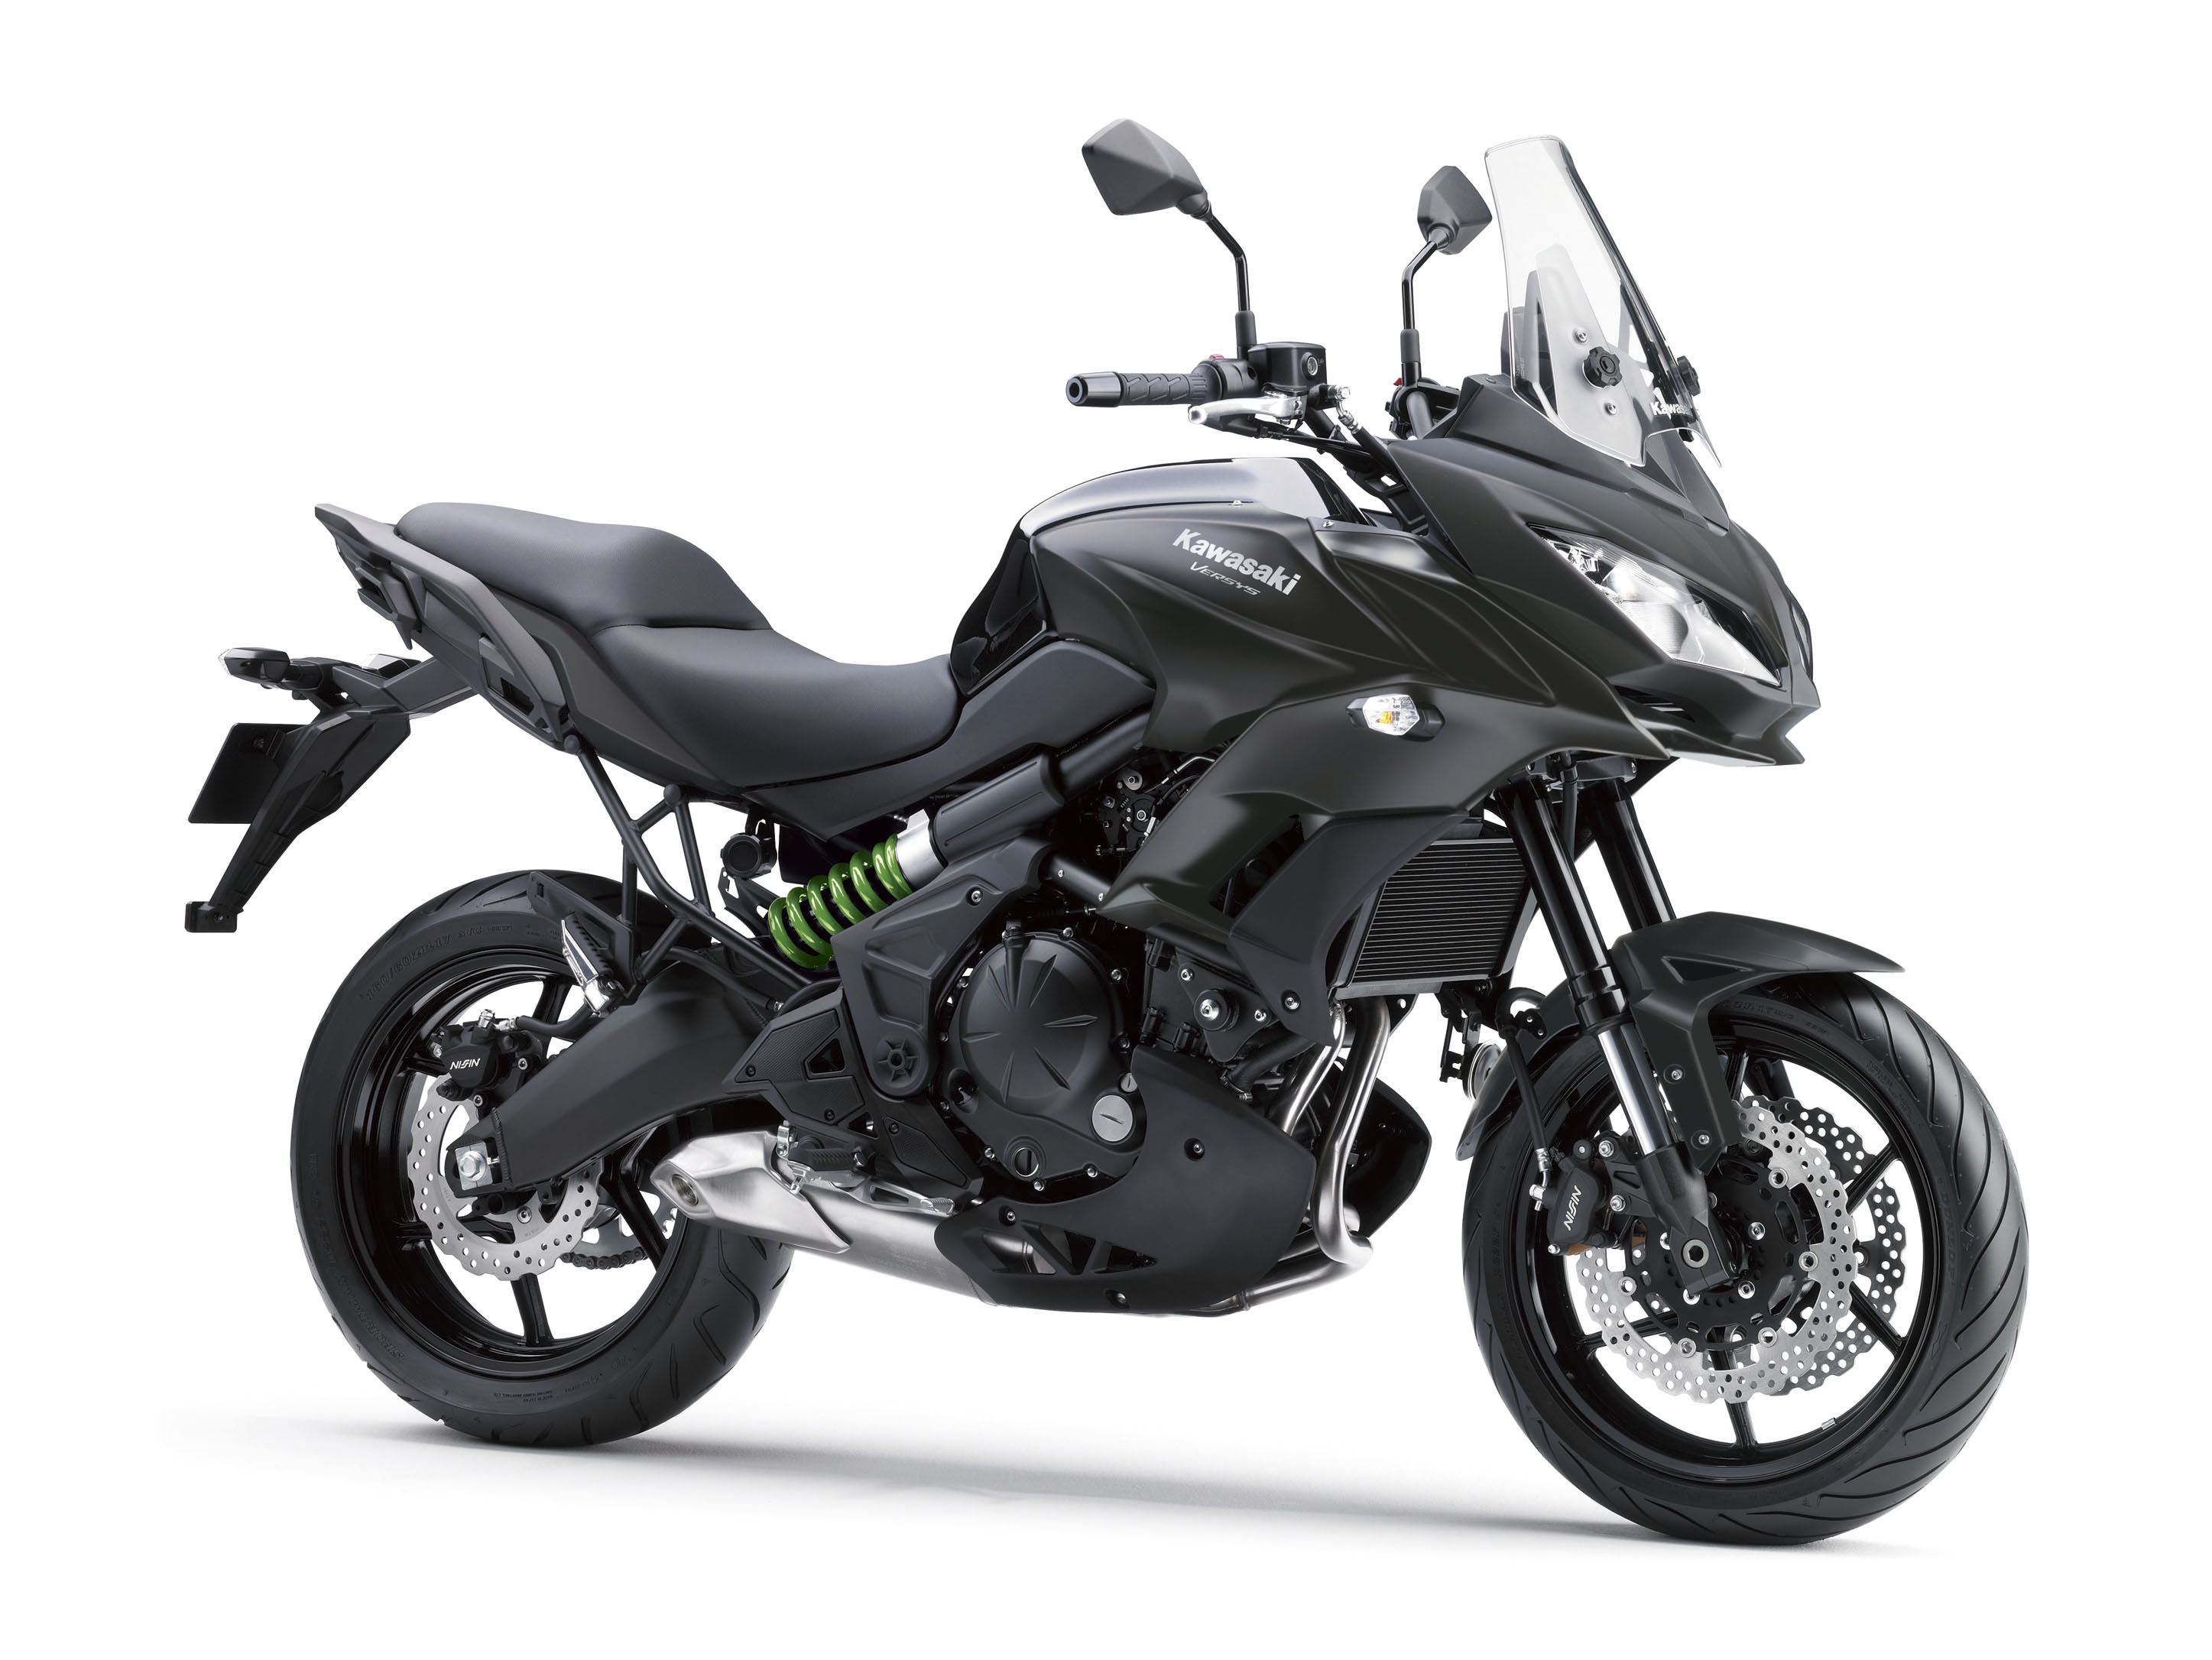 New colours for 2016 Kawasaki ER-6 range plus Vulcan S and Versys 650